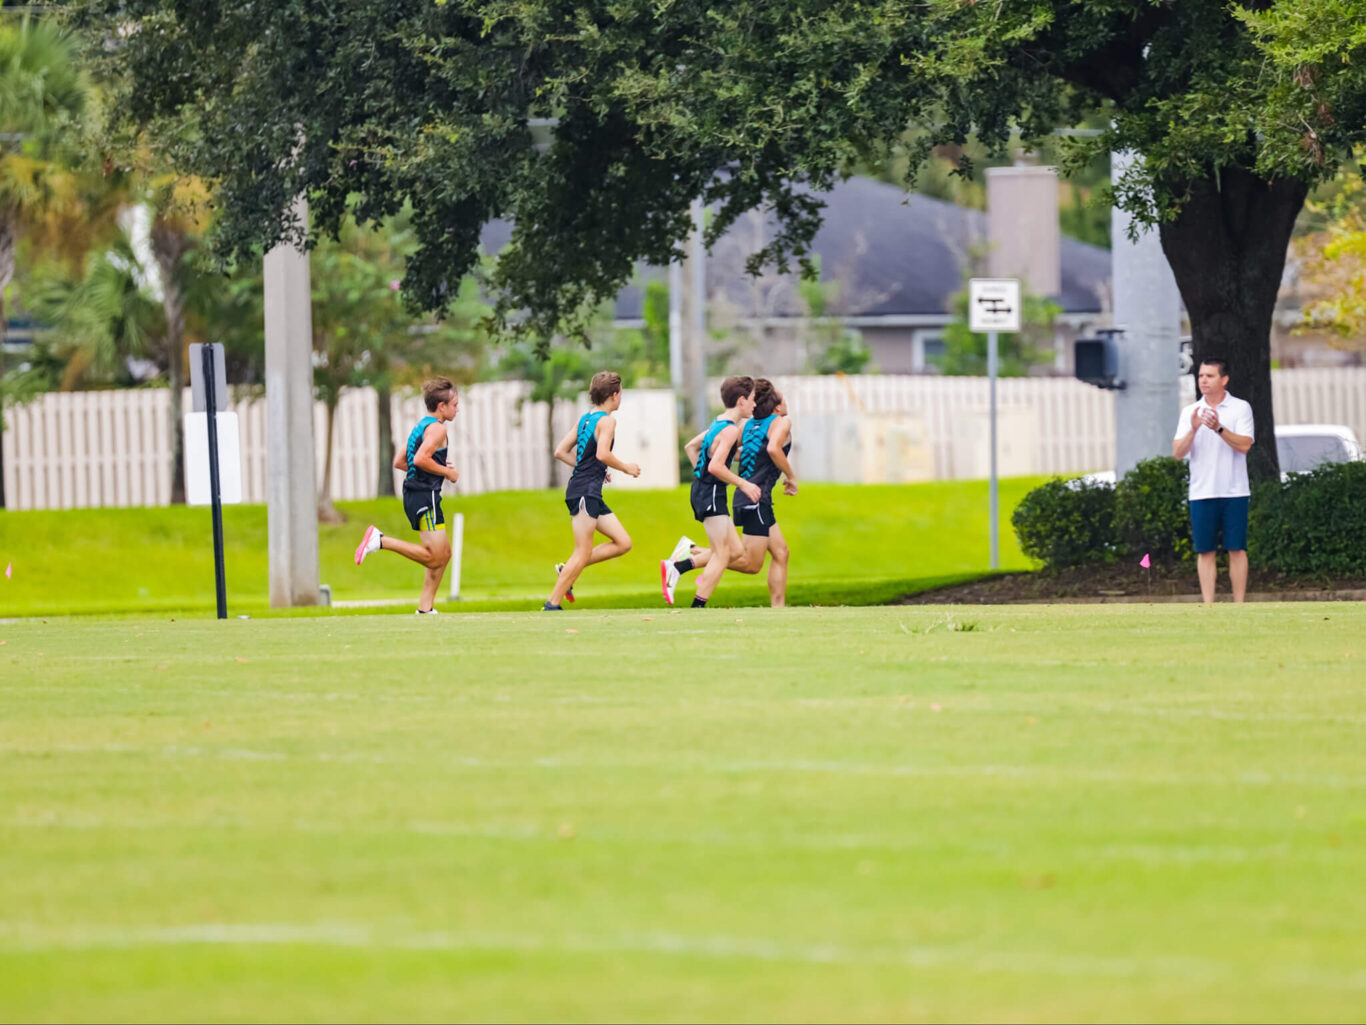 A group of boys running cross country on a grassy field.